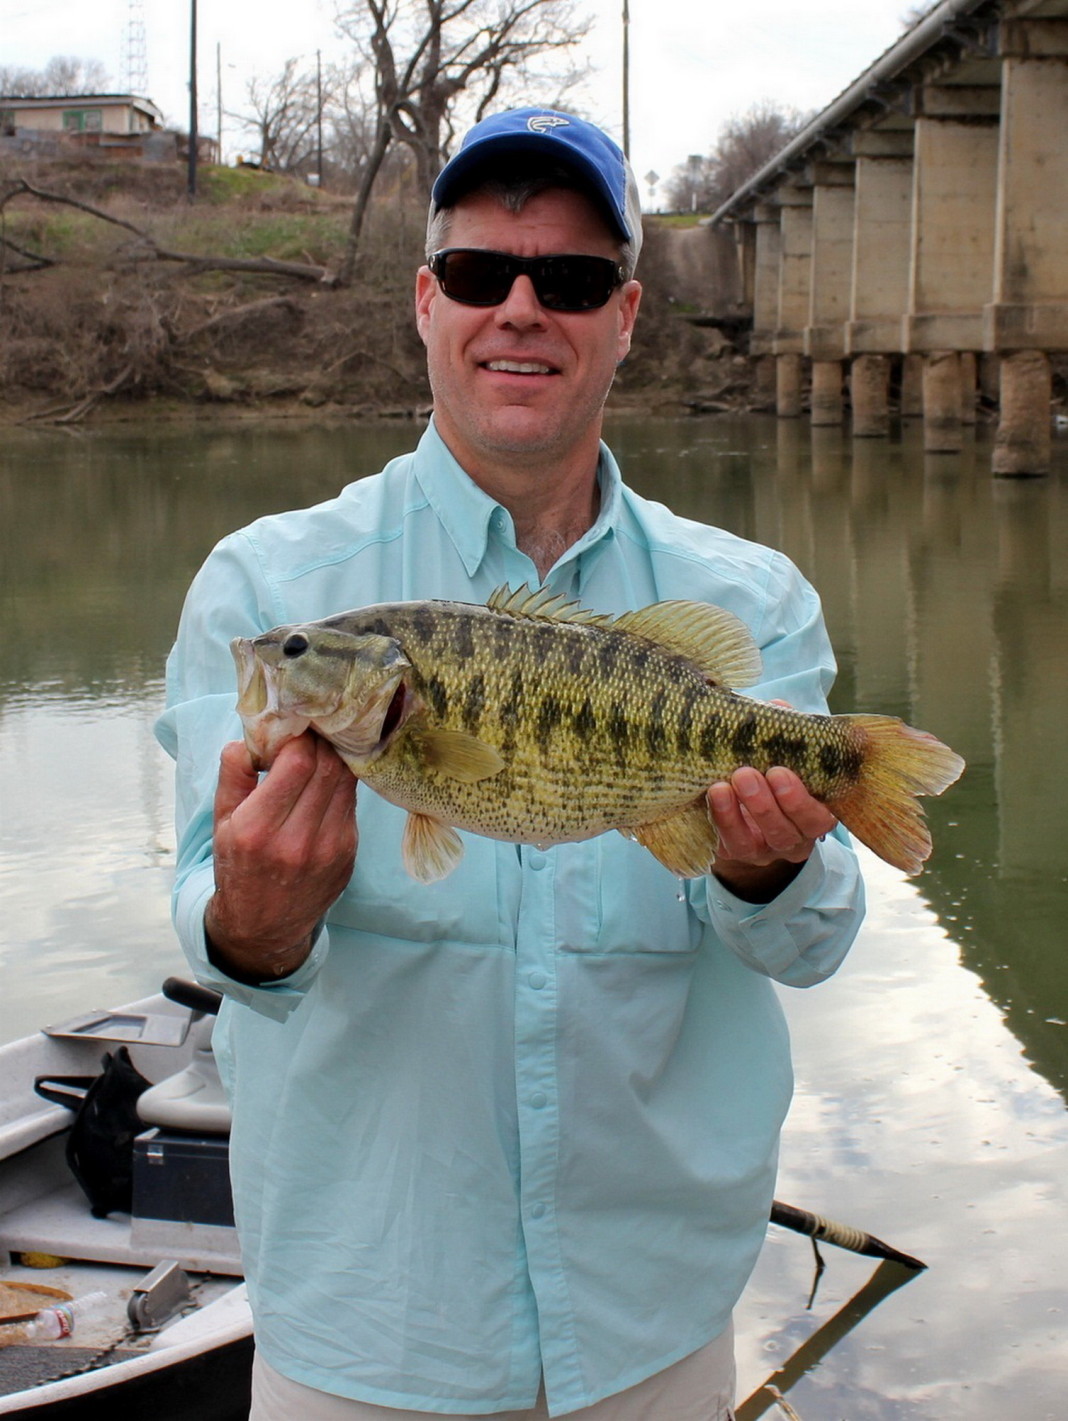 The fish is the state record and may qualify as a world record.